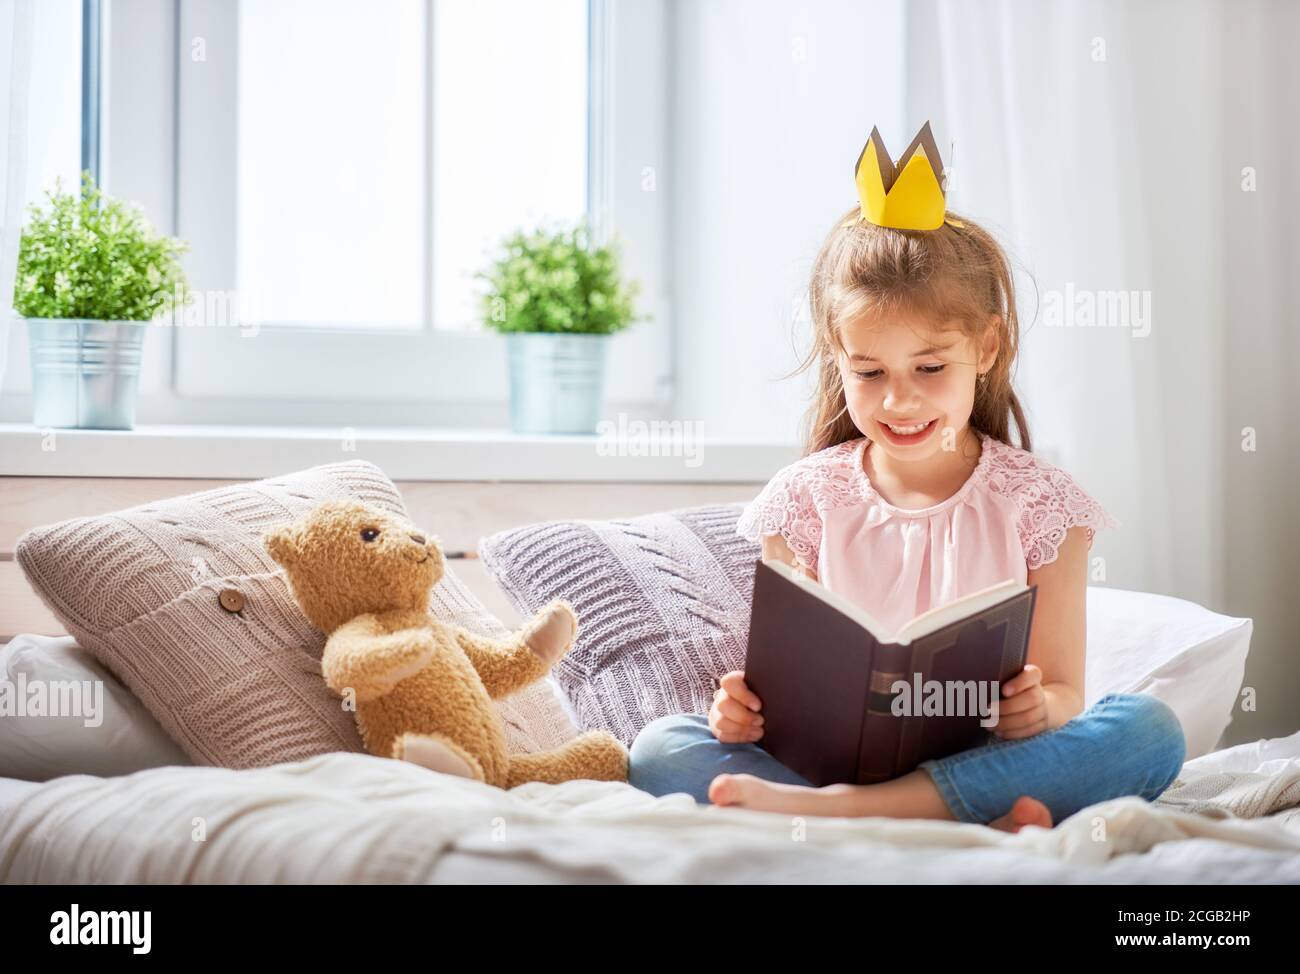 Cute little child girl reading a book in the bedroom. Kid with crown sitting on the bed near window. Stock Photo